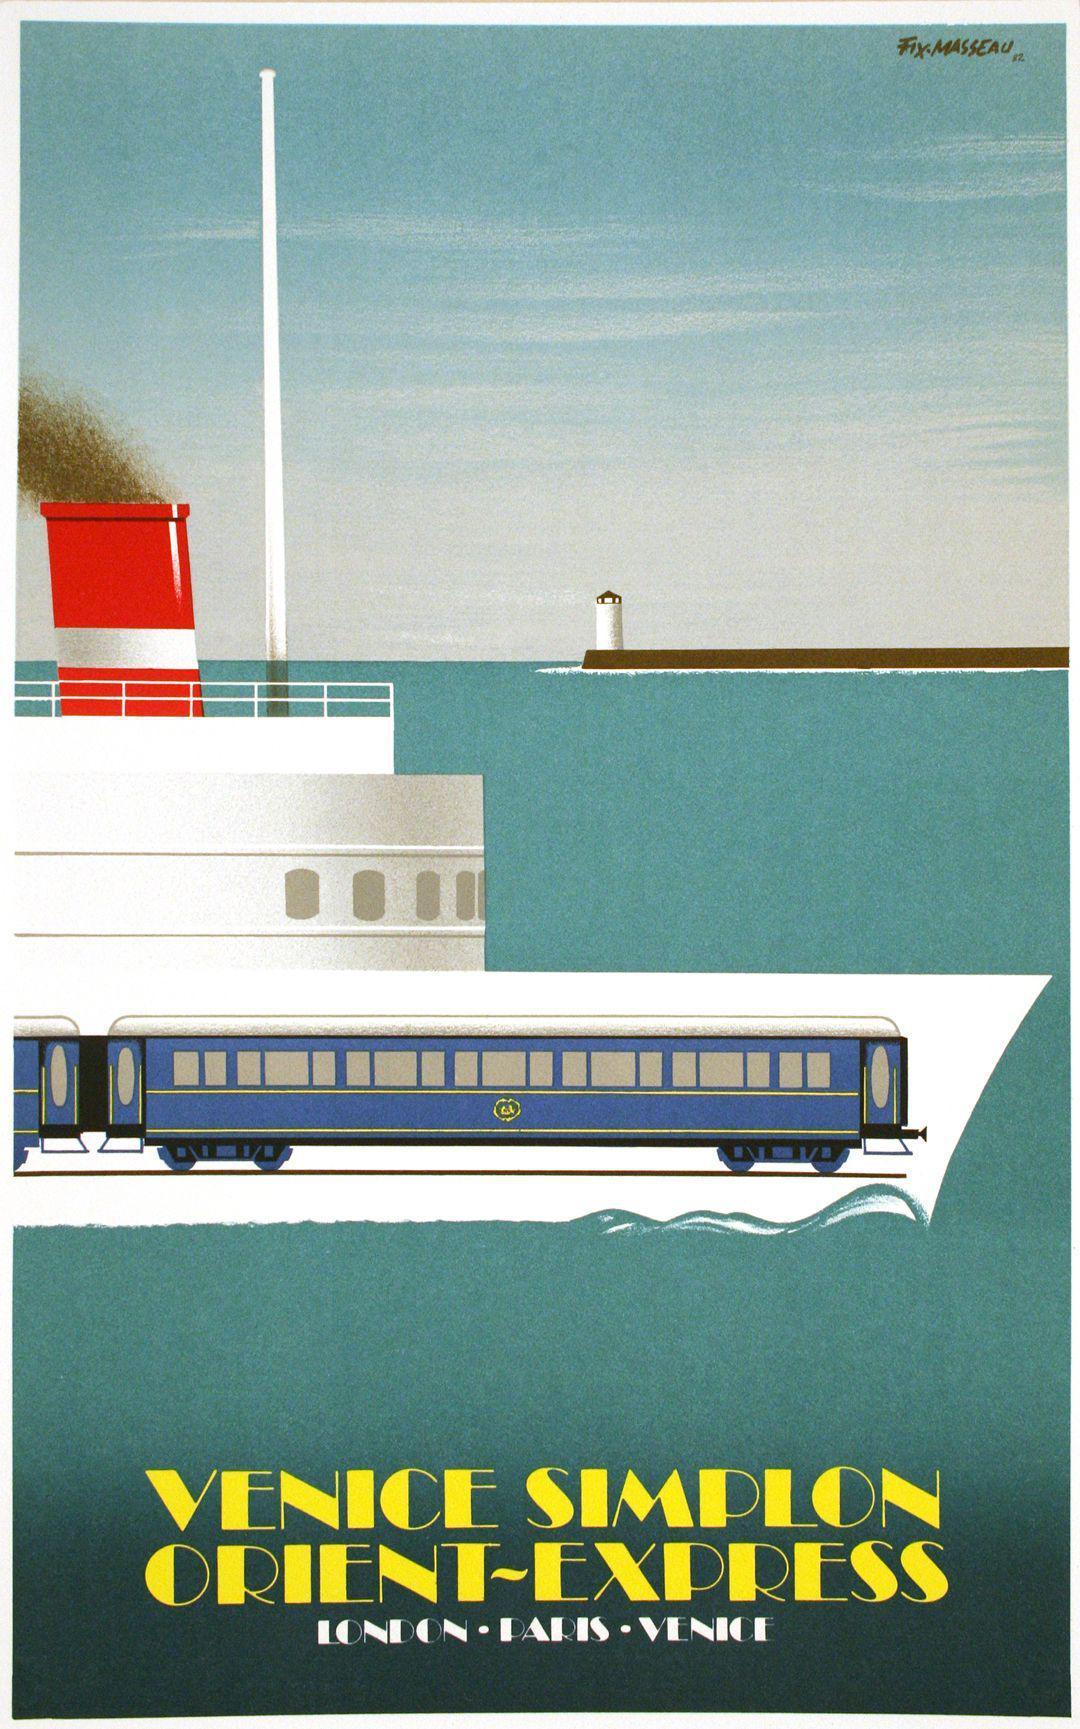 Original Vintage Poster for the Venice Simplon Orient Express 1982 - The Crossing of the Channel